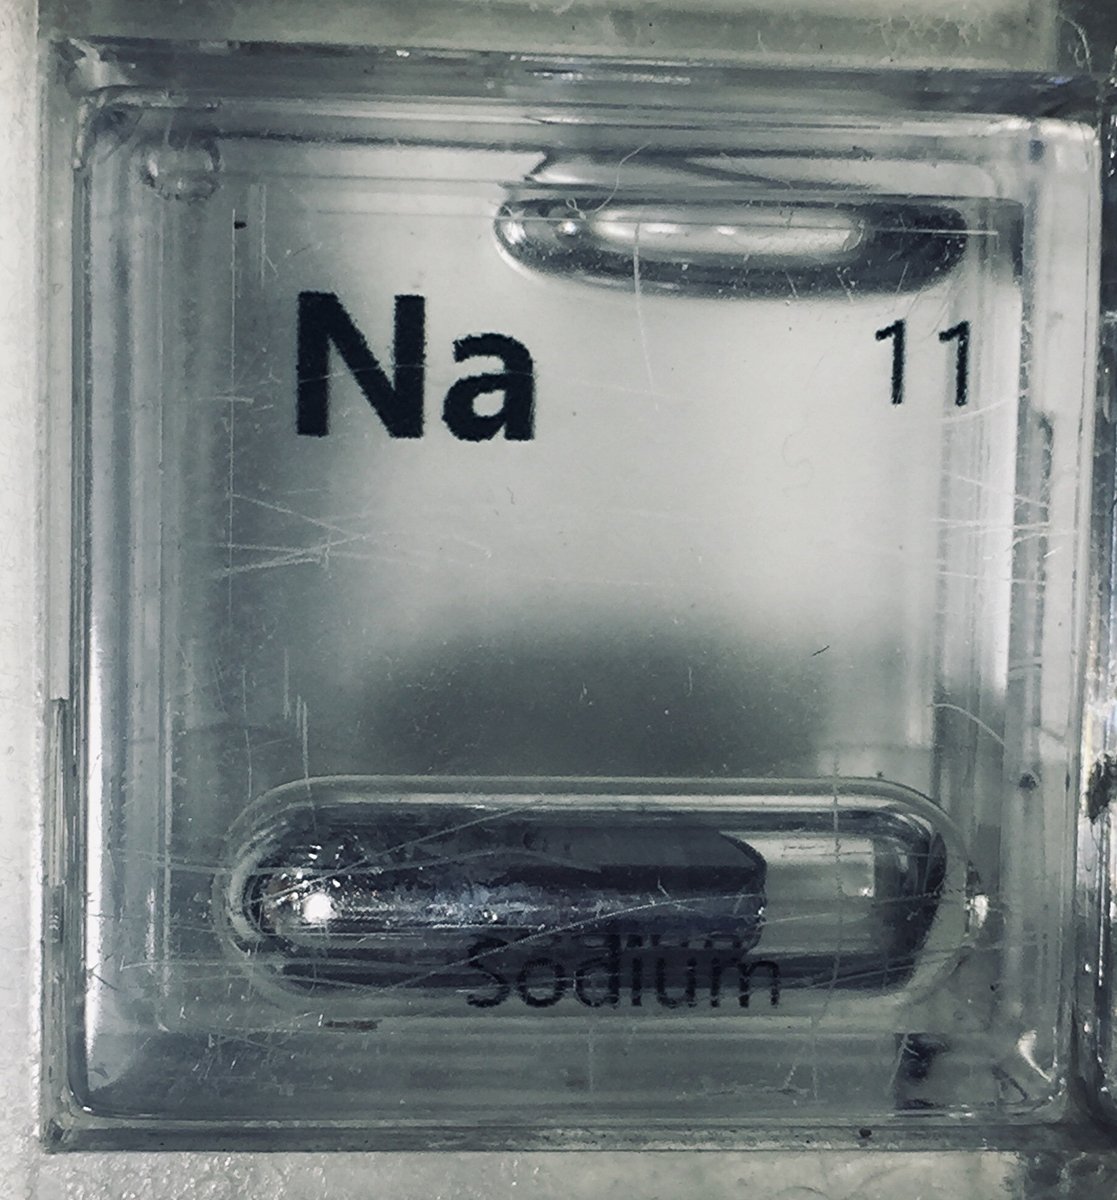 Sodium  #elementphotos. Sodium is reactive so it needs to be stored in an argon-filled ampoule (Pic 1), or (less ideal but more practical for use) under oil. Last Pic has an ampoule surrounded by rock salt crystals (NaCl).